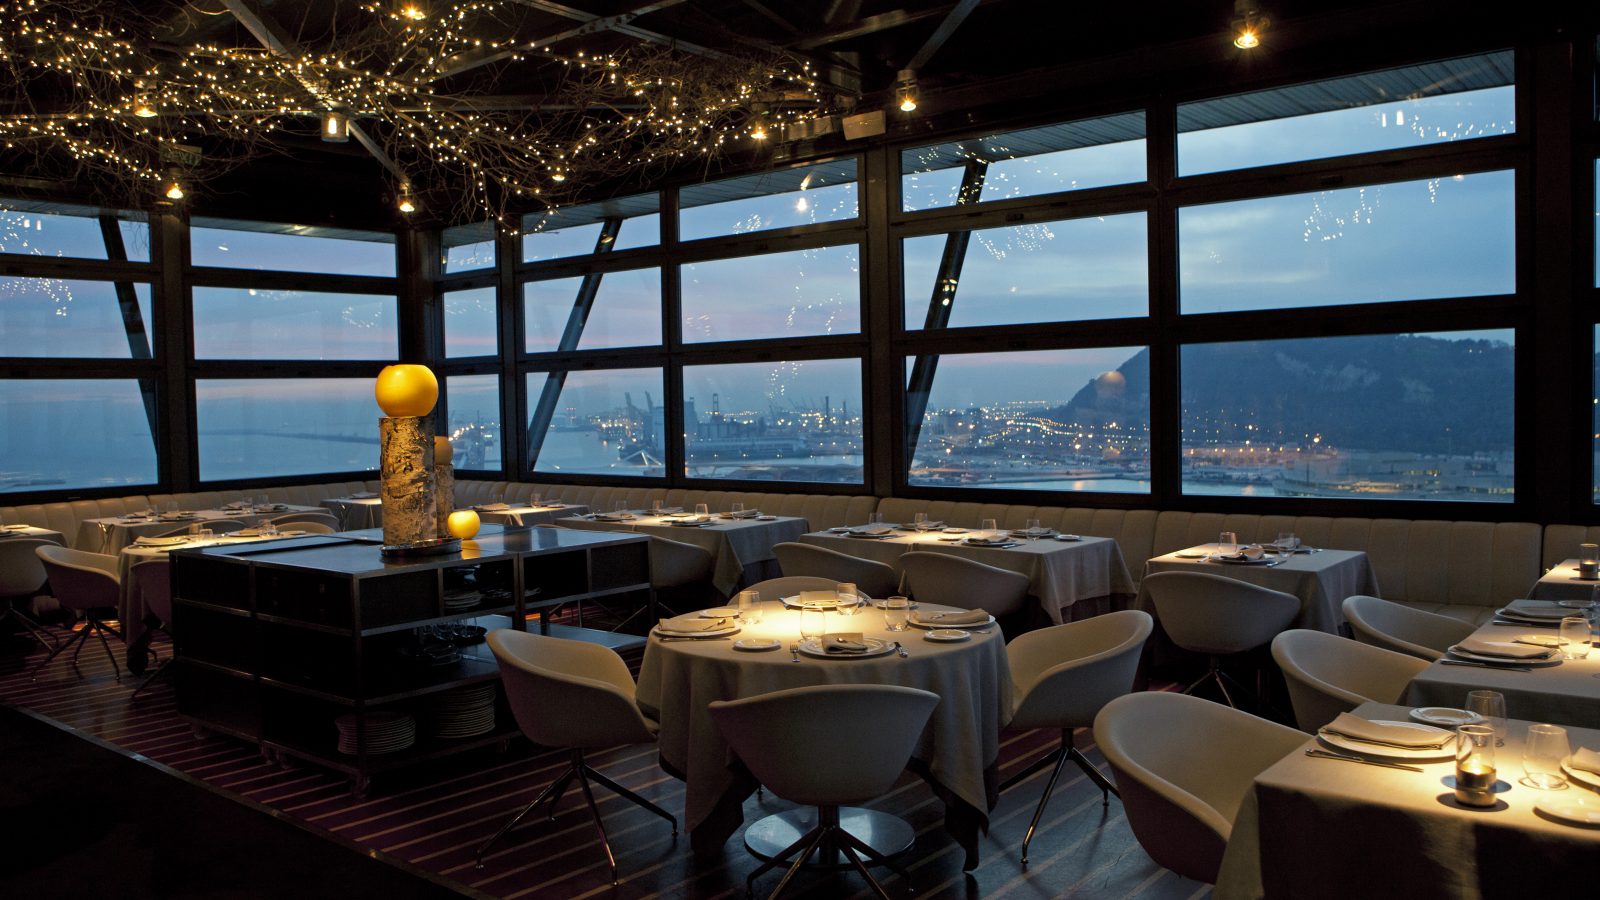 Barcelona venue - restaurant in a tower overlooking the harbour